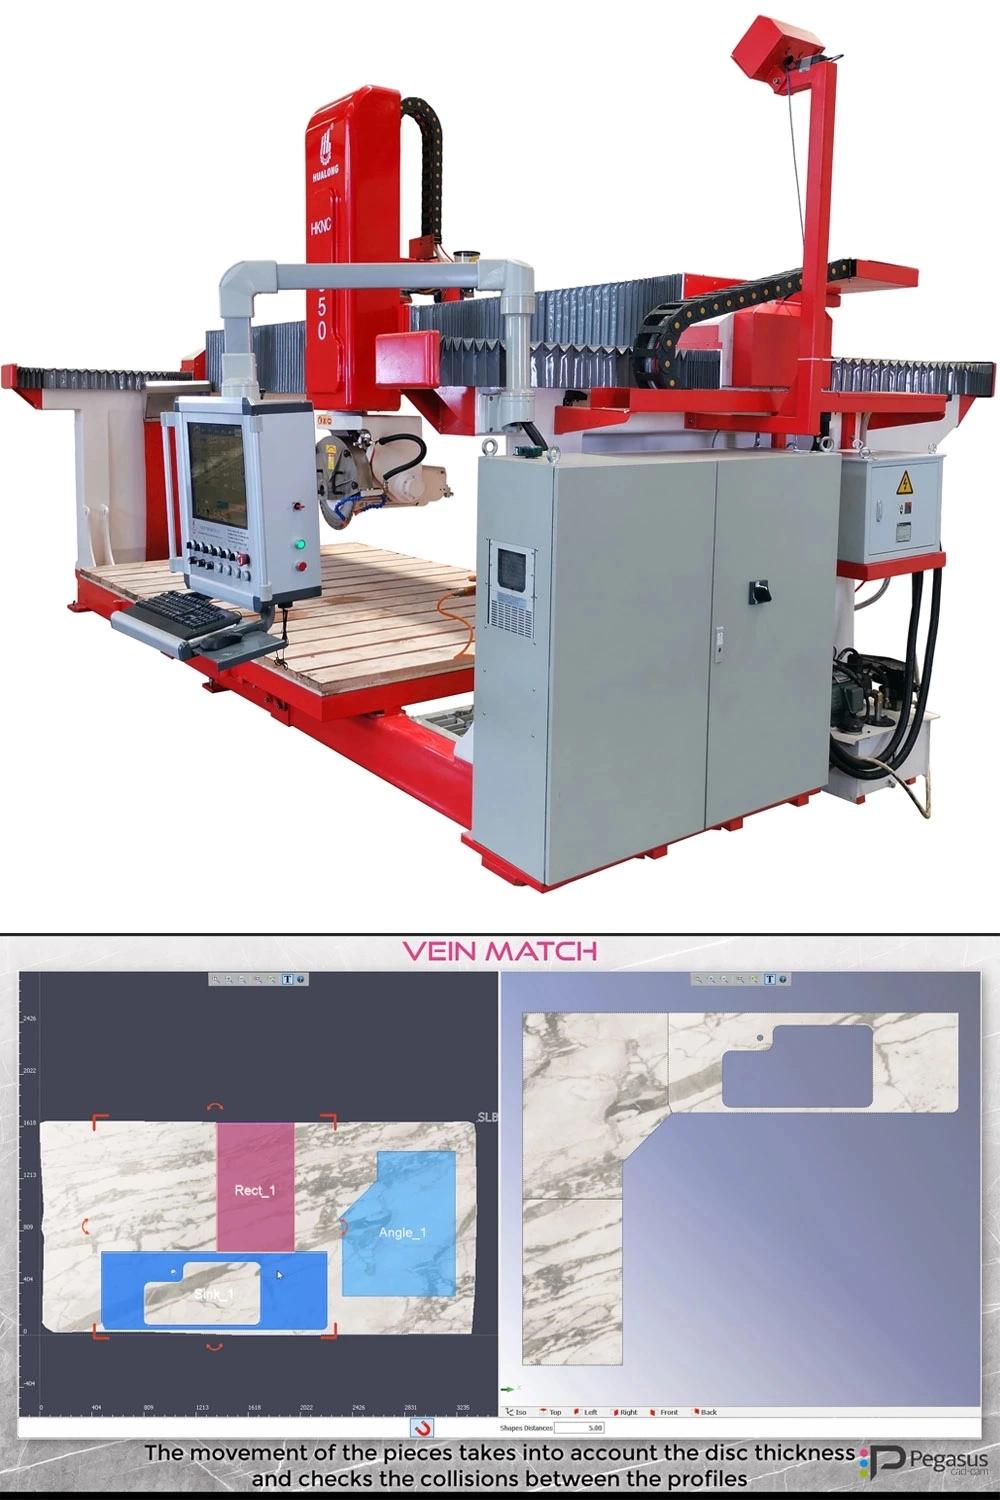 Hualong Stone Machinery Hknc-650X Marble CNC 5 Axis Bridge Saw Granite Cutting Stone Machine with Vacuum Lifter for Sale